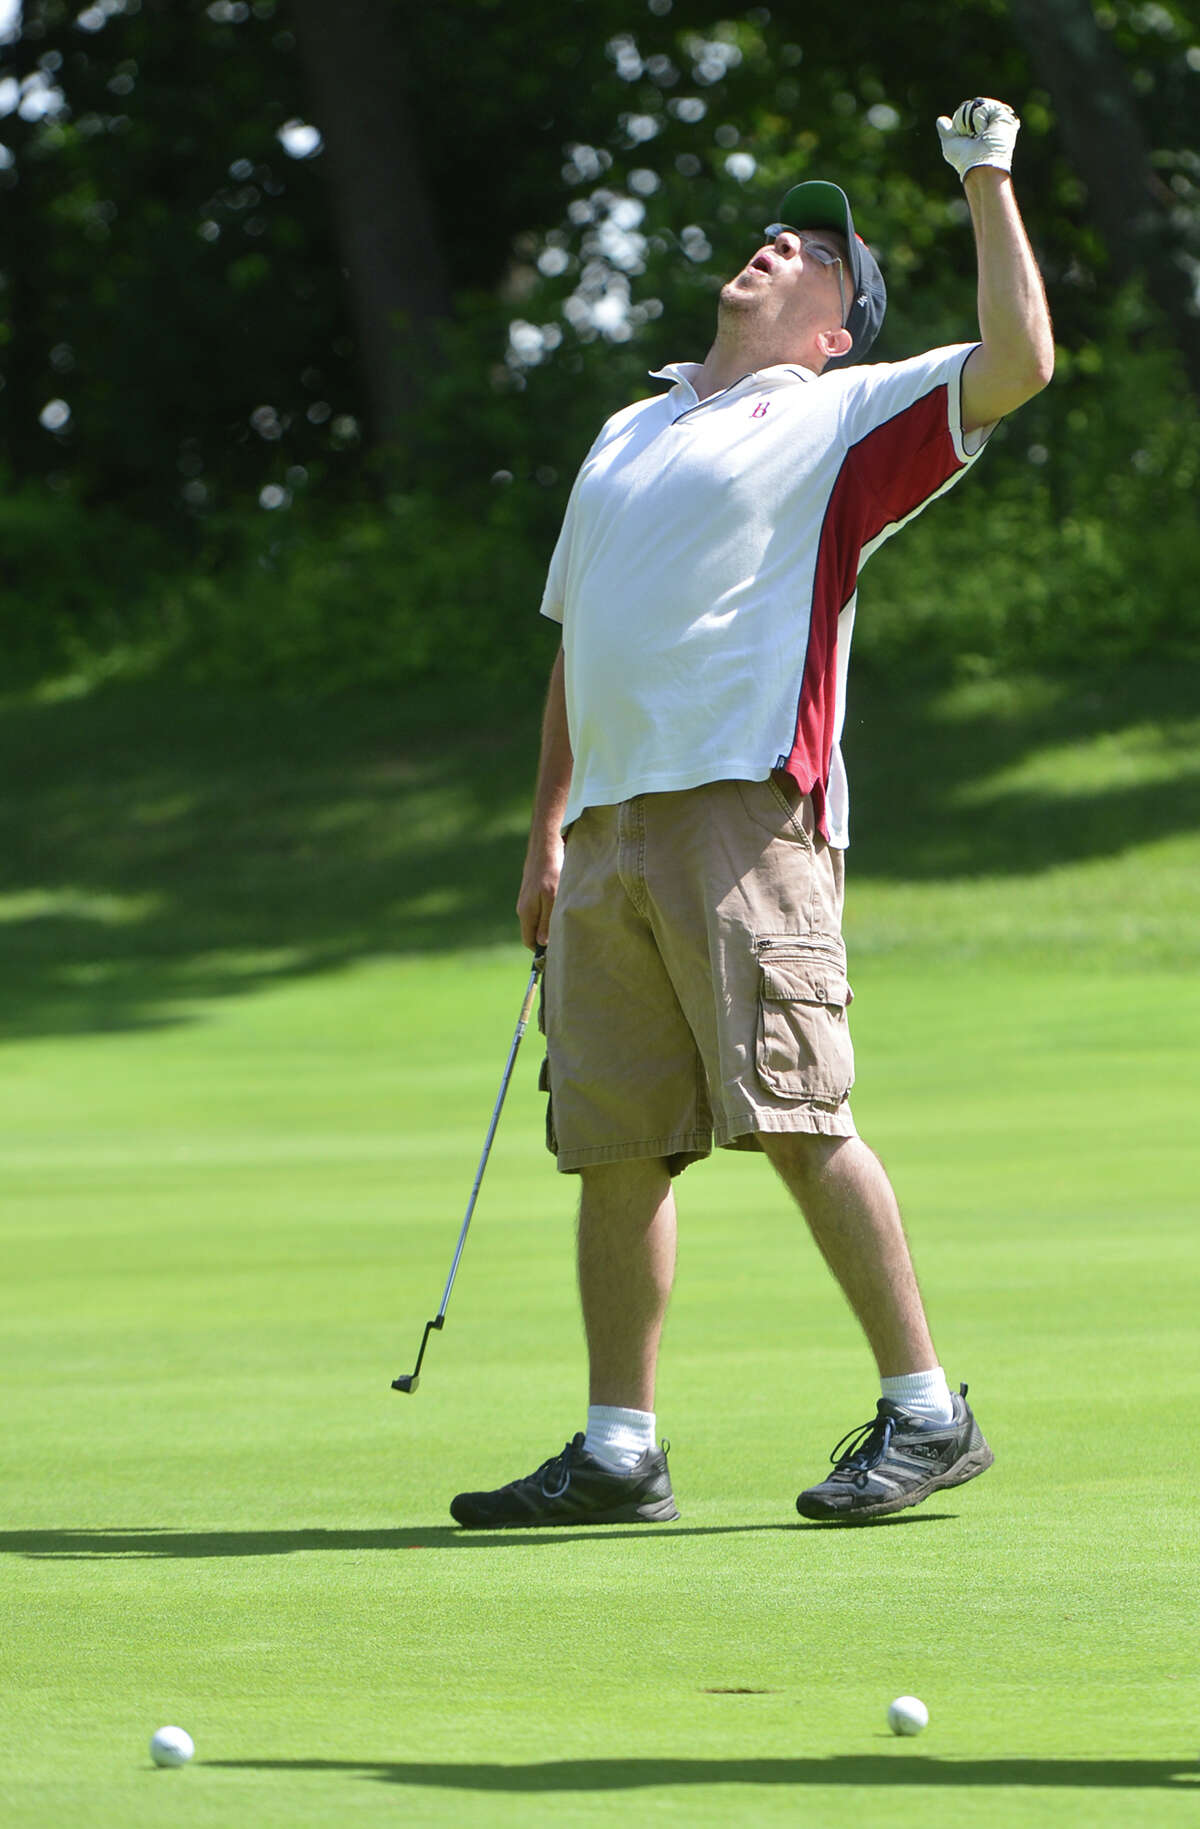 Matt Copeland celebrates sinking a put on the 4th hole at Oak Hills Public Golf Course during Brien McMahon High School's Alumni Association 11th annual golf tournament and fundraiser on Monday July 11 2016 in Norwalk Conn.